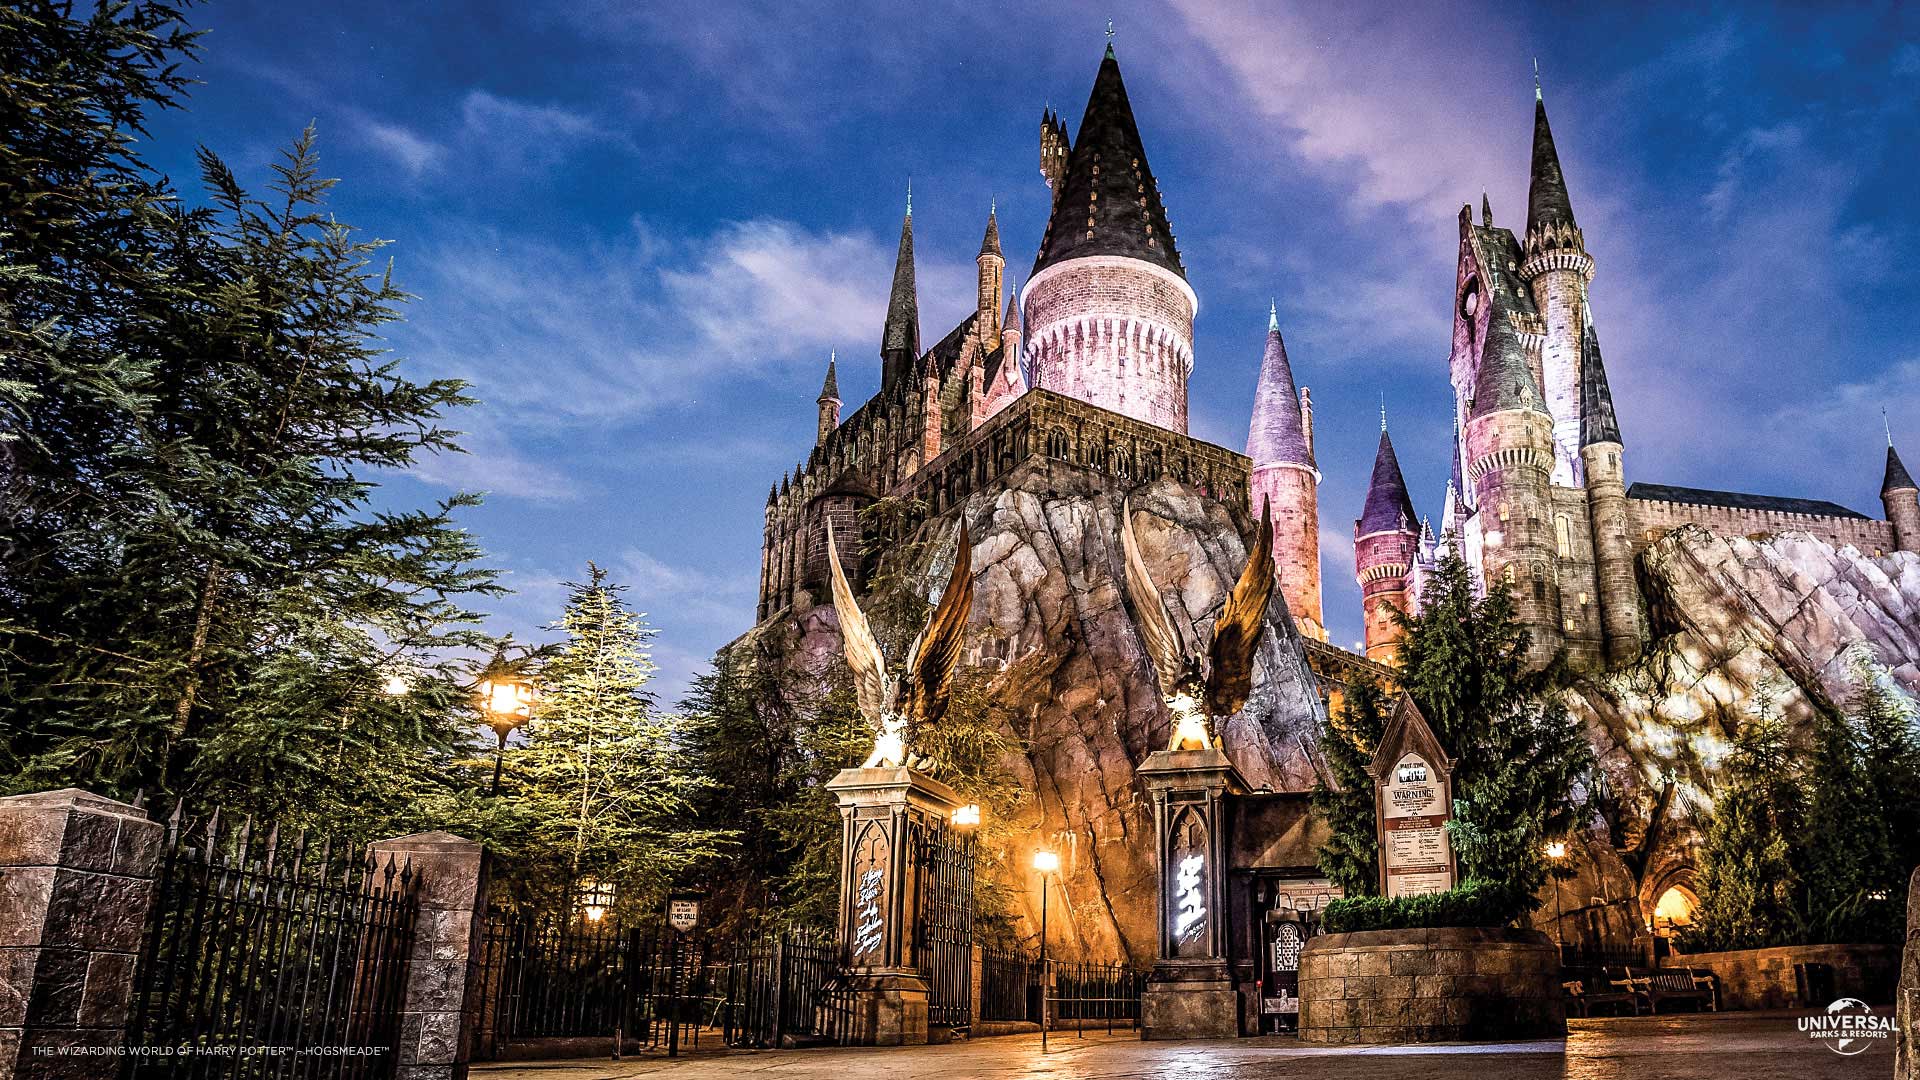 Try out our new Harry Potter themed .wizardingworld.com